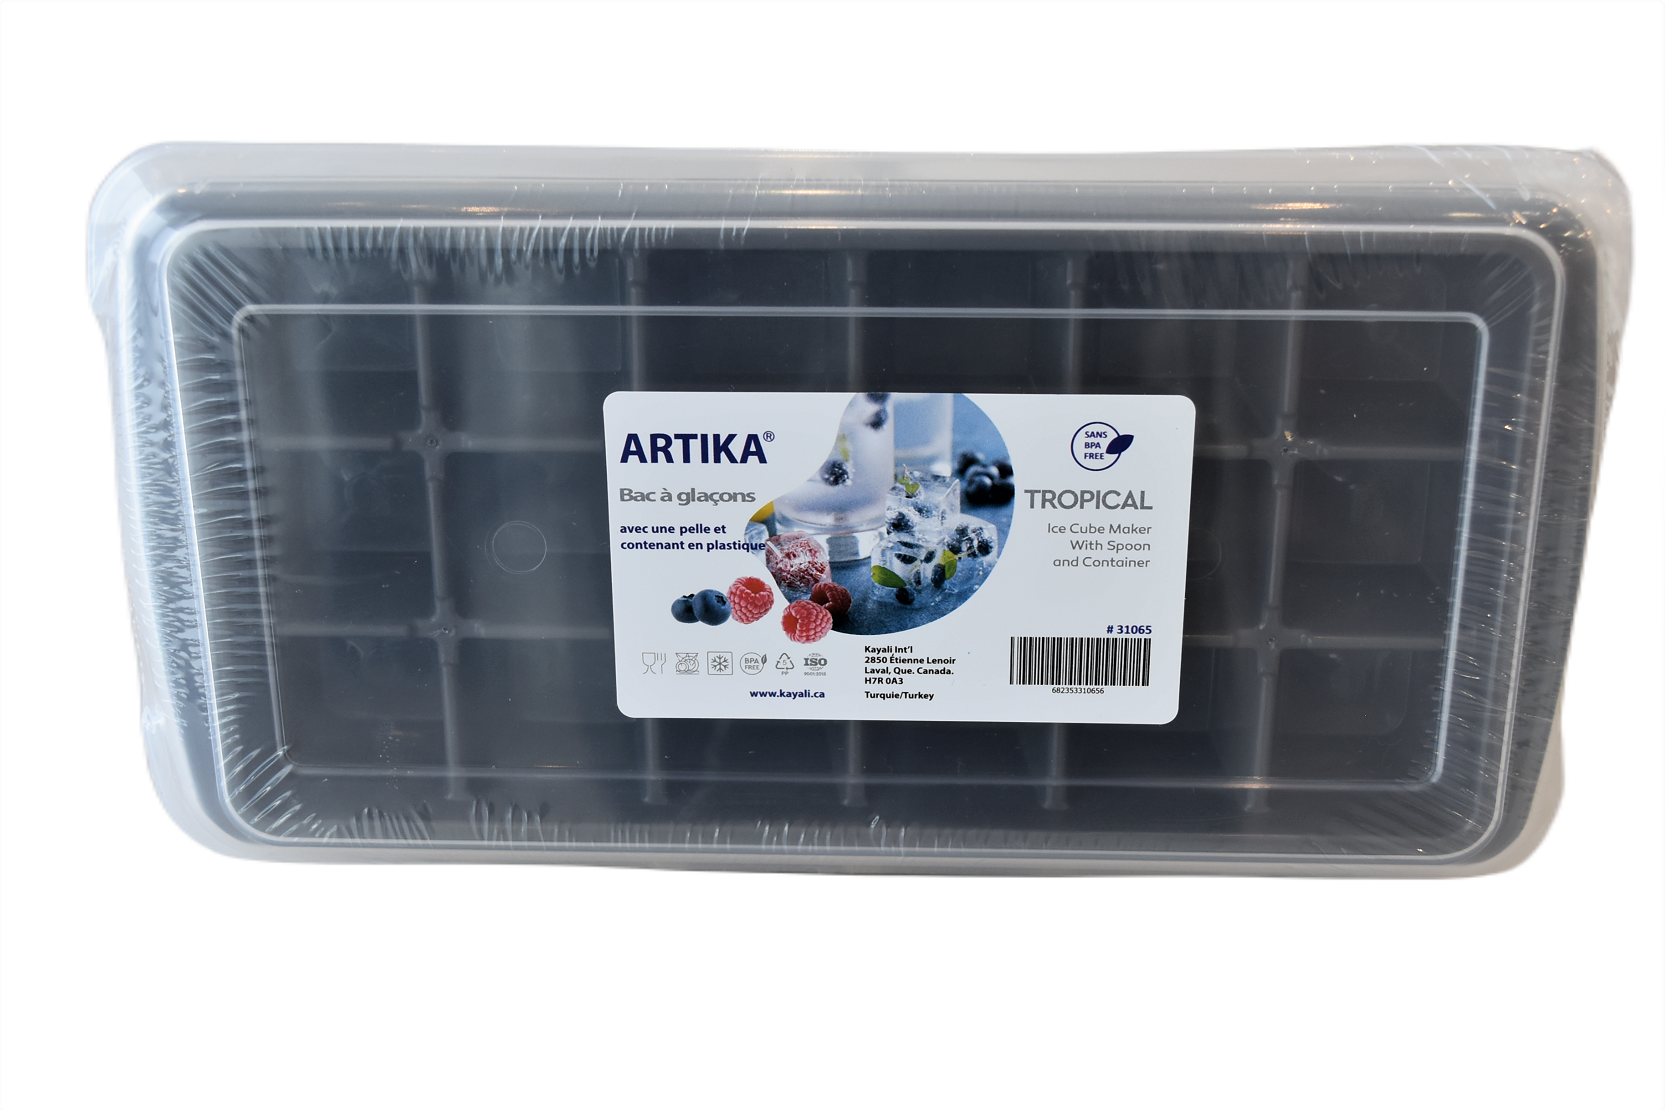 Artika Ice Cube Maker With Spoon And Container